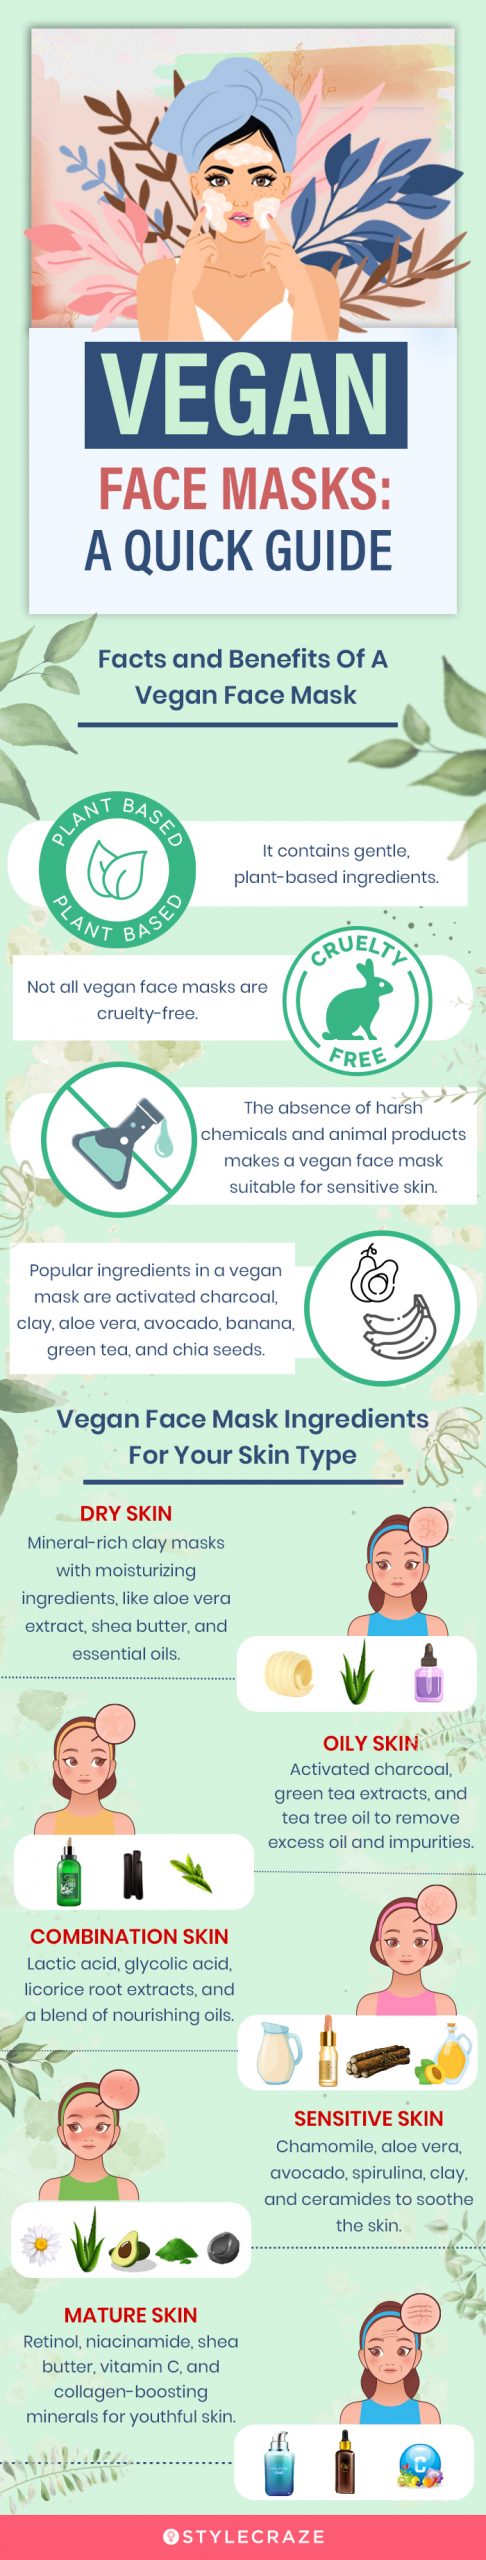 Vegan Face Masks: A Quick Guide (infographic)